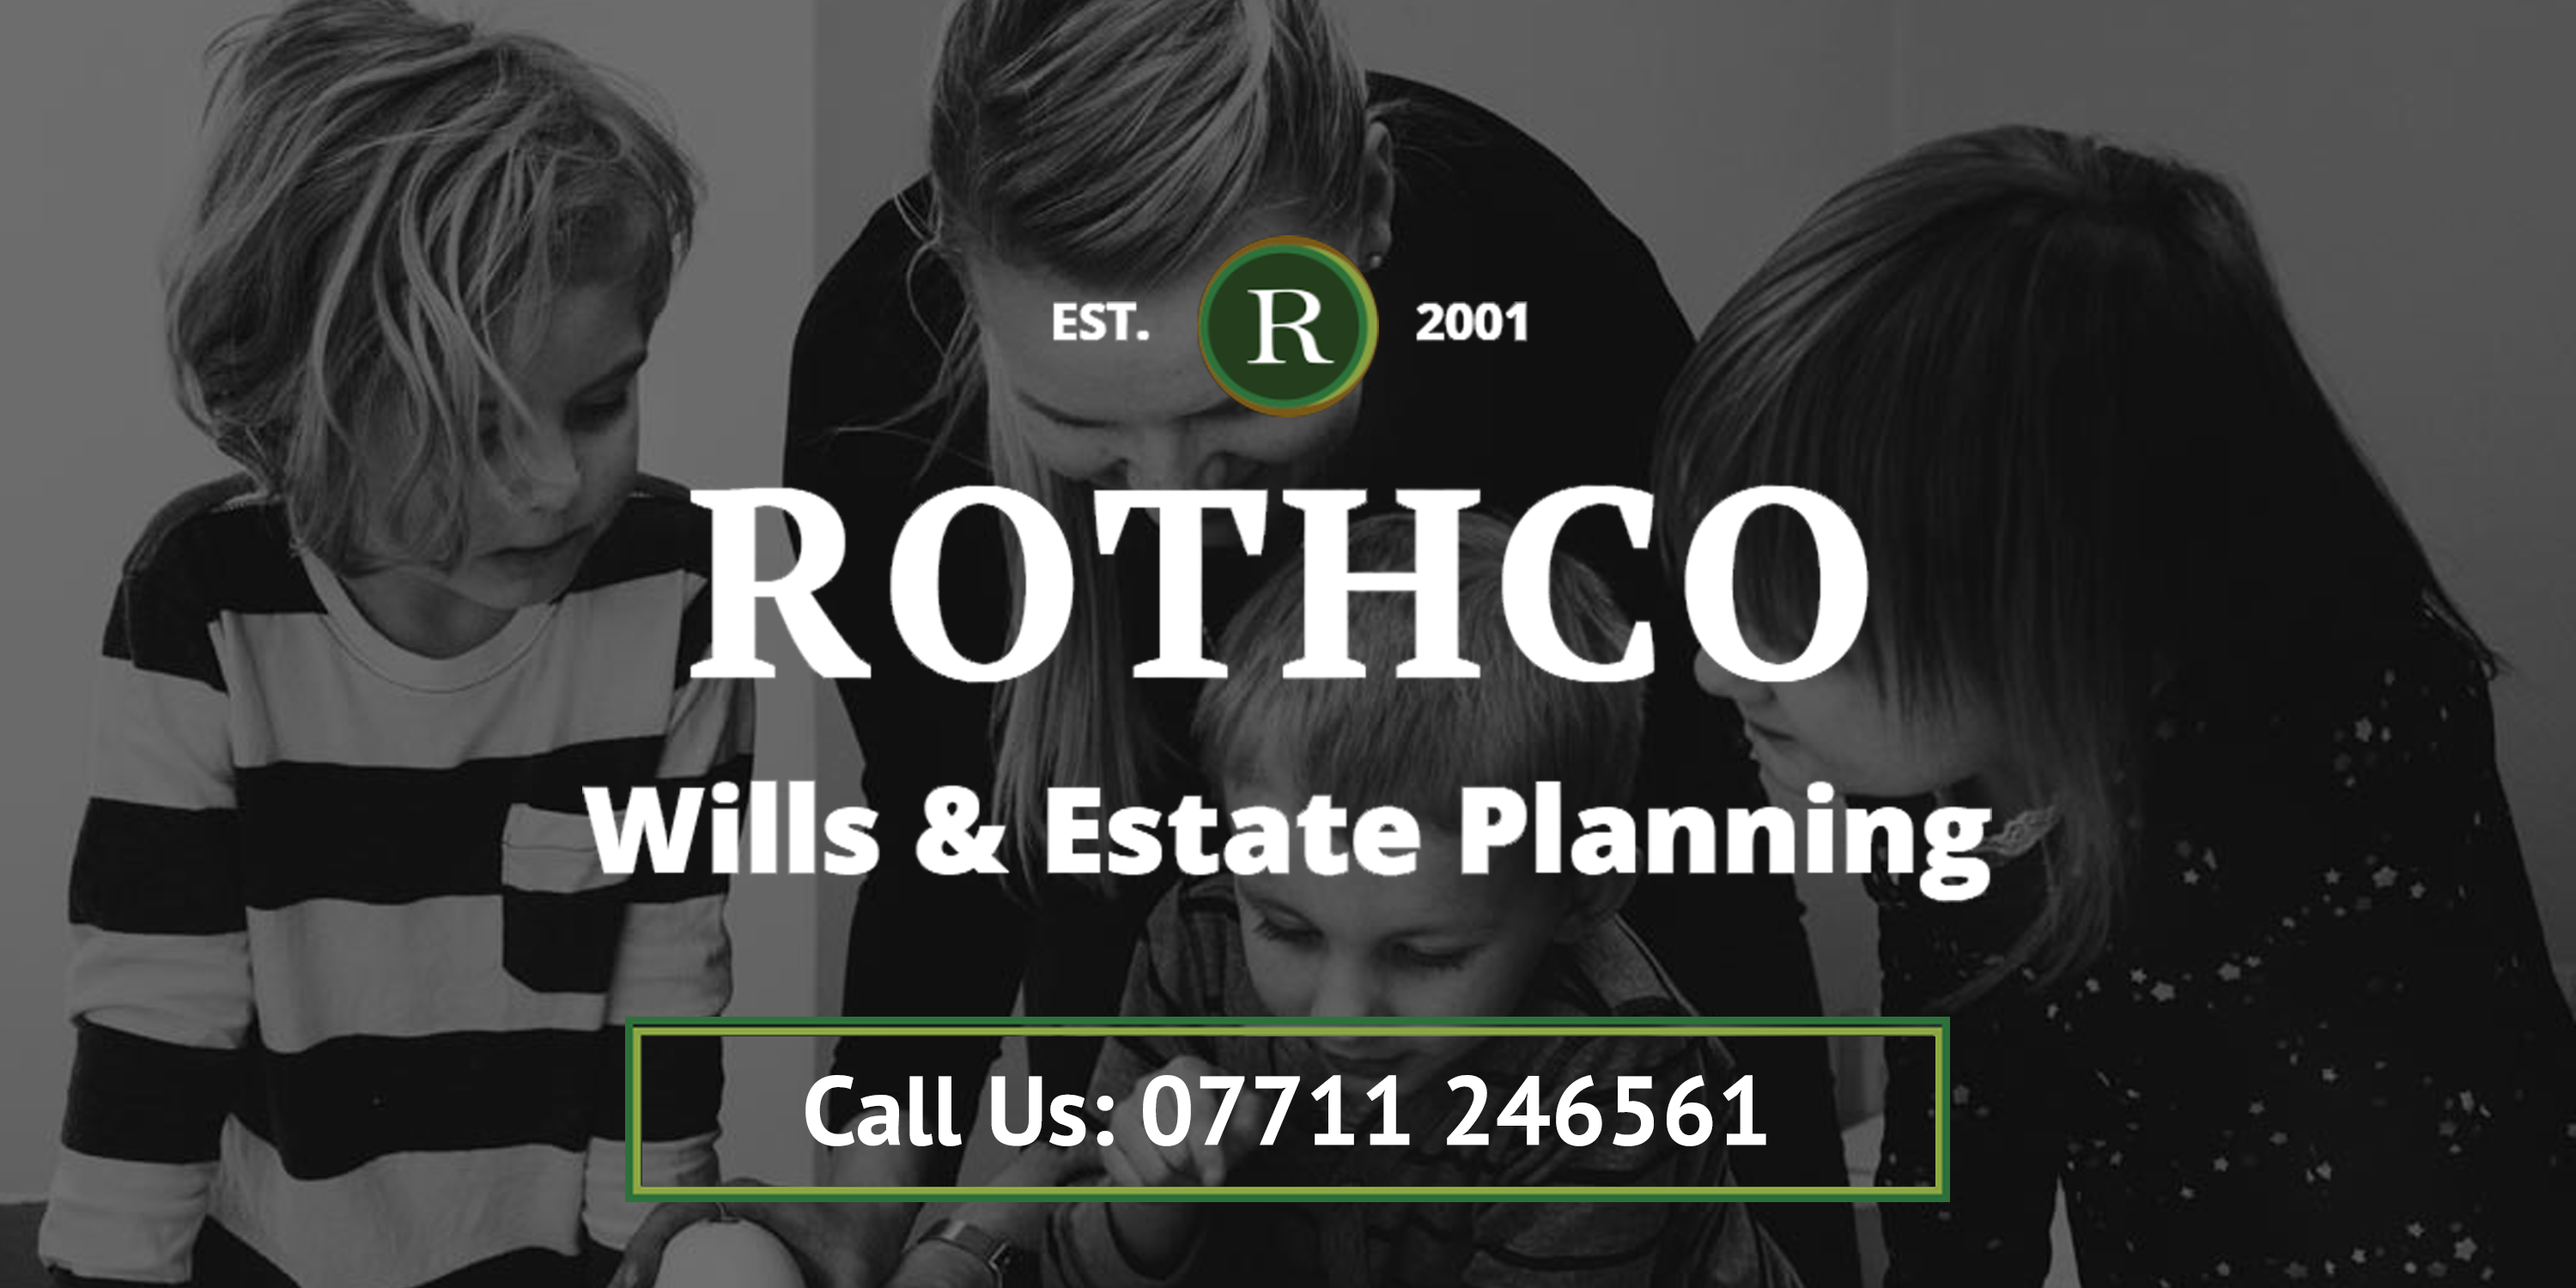 ROTHCO Wills & Estate Planning